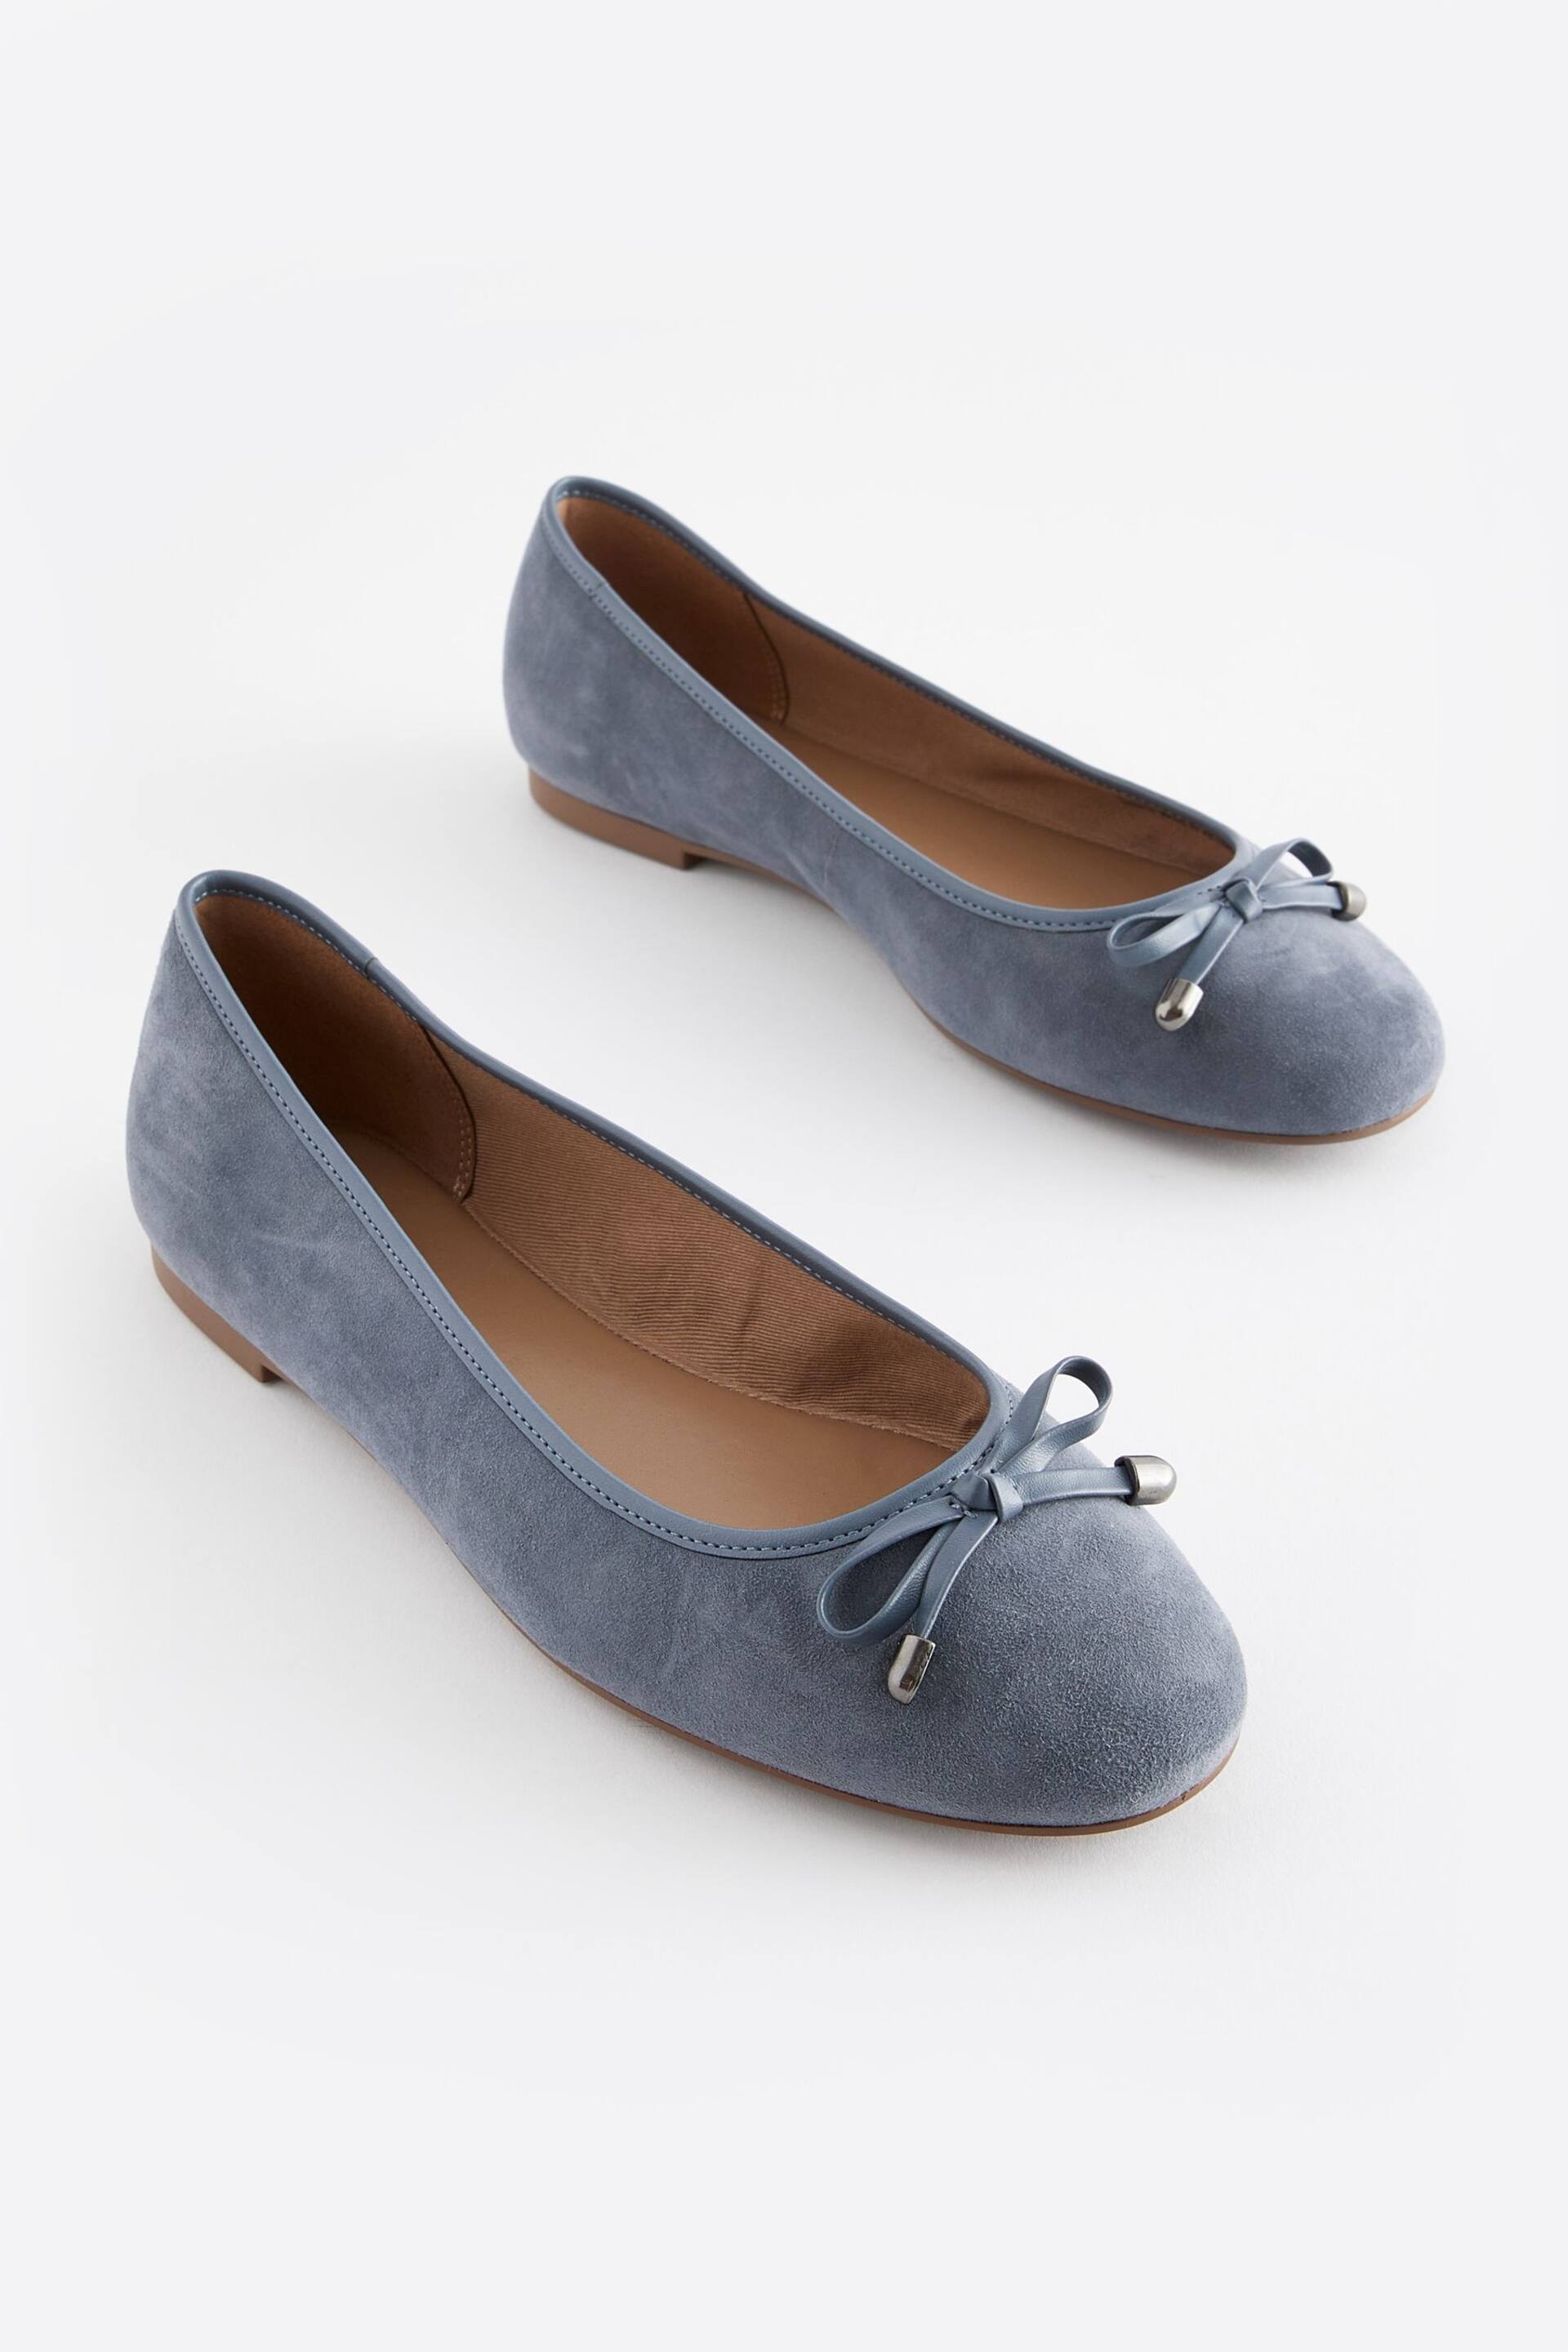 Blue Forever Comfort® Round Toe Leather Ballerina Shoes - Image 5 of 9